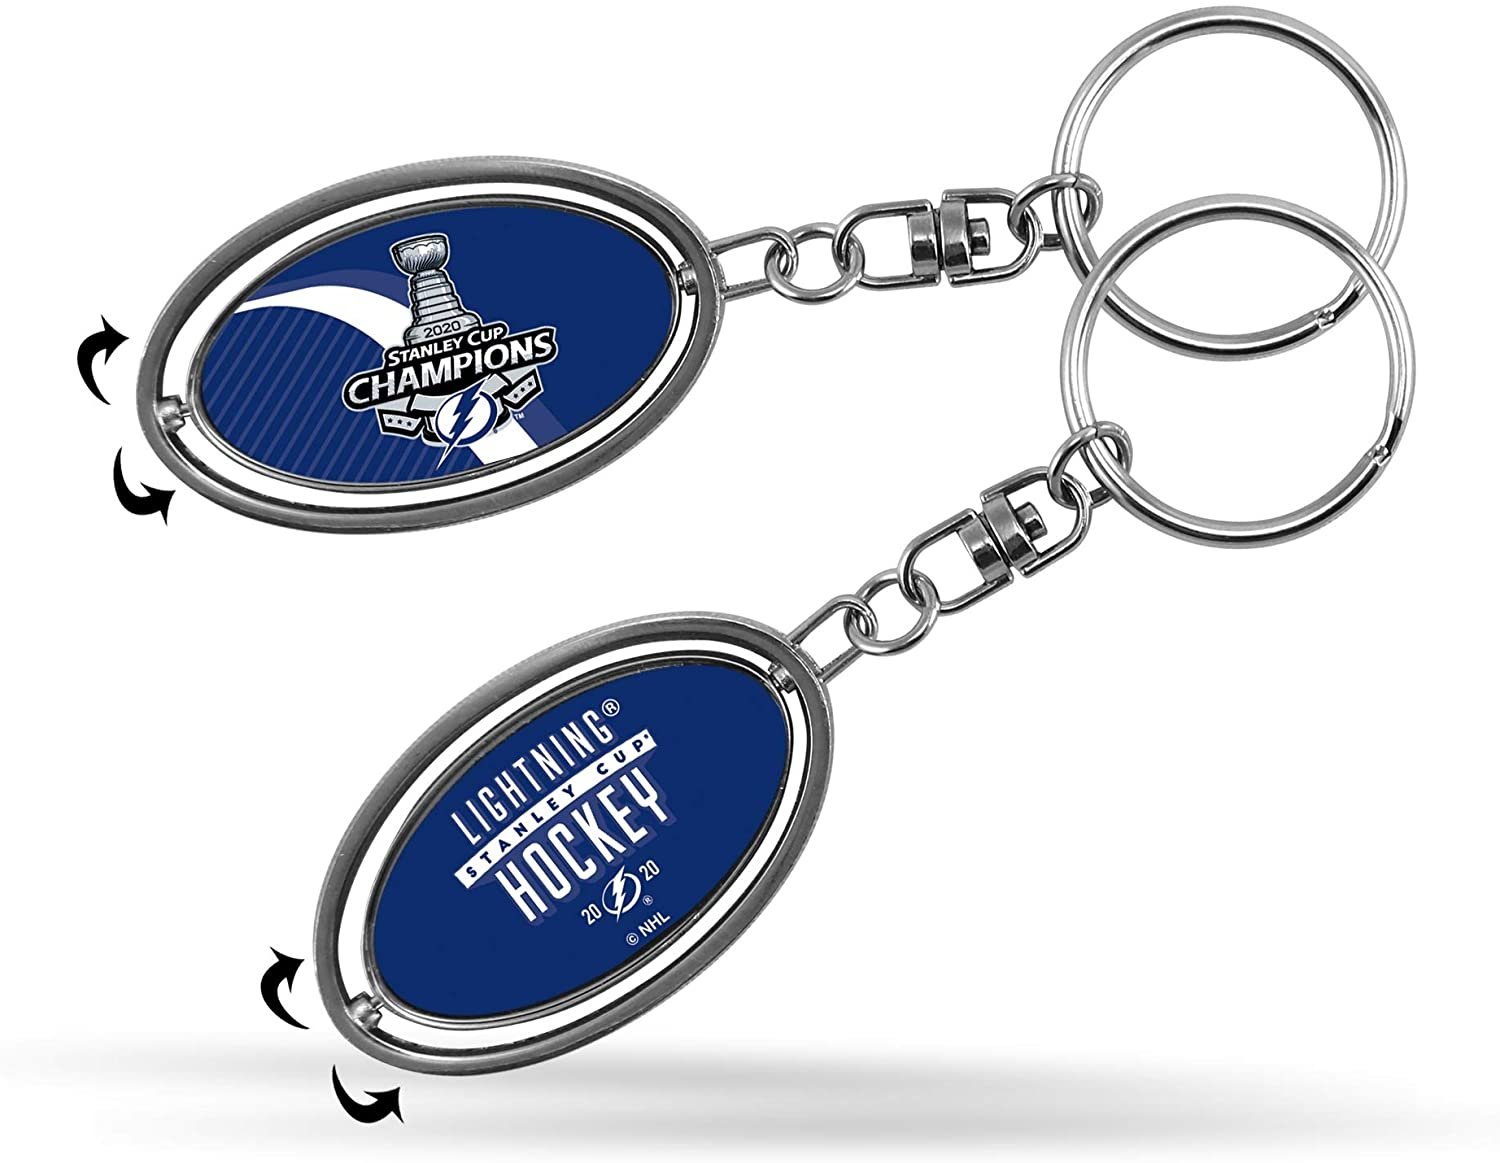 Tampa Bay Lightning 2020 Stanley Cup Champions Premium Metal Keychain, 2-Sided Spinner, Oval Fob